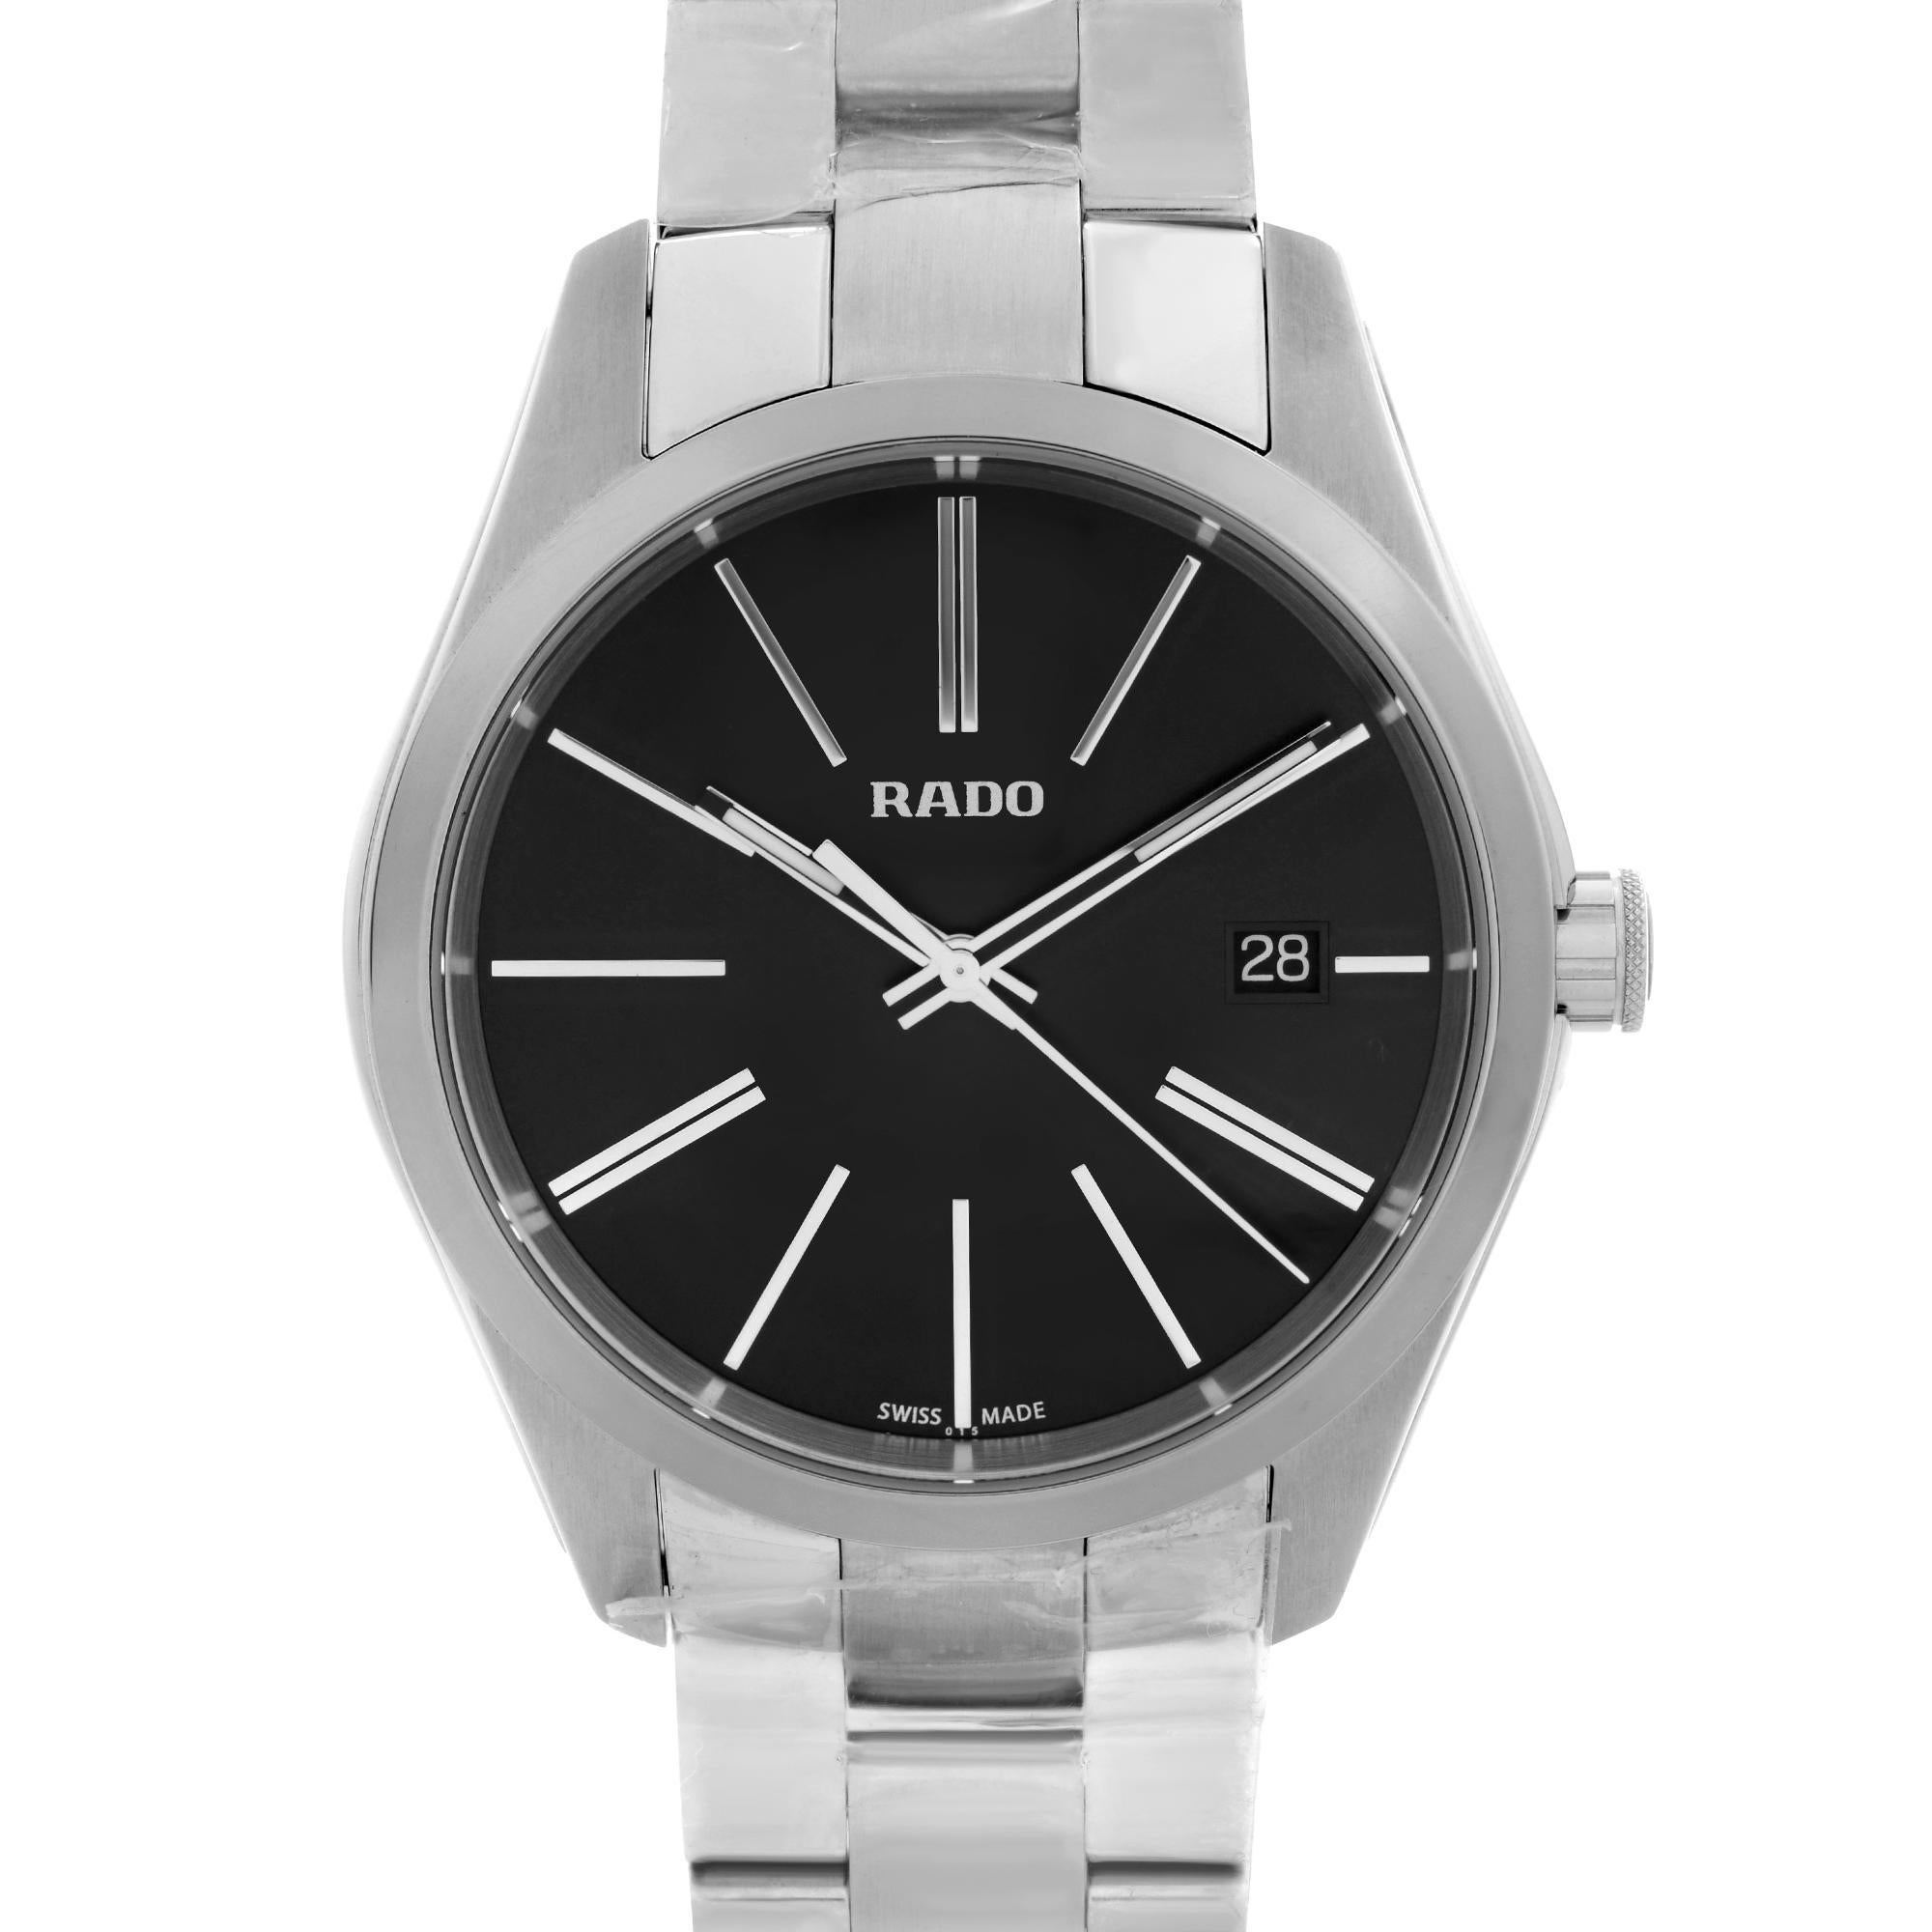 Unworn Rado Hyperchrome 40mm Steel Ceramic Date Black Dial Mens Quartz Watch R32297153. This Beautiful Men's Timepiece Powered By a Quartz Movement and Features: Stainless Steel Case and Bracelet, Fixed Silver-Tone Ceramic Bezel, Black Dial with